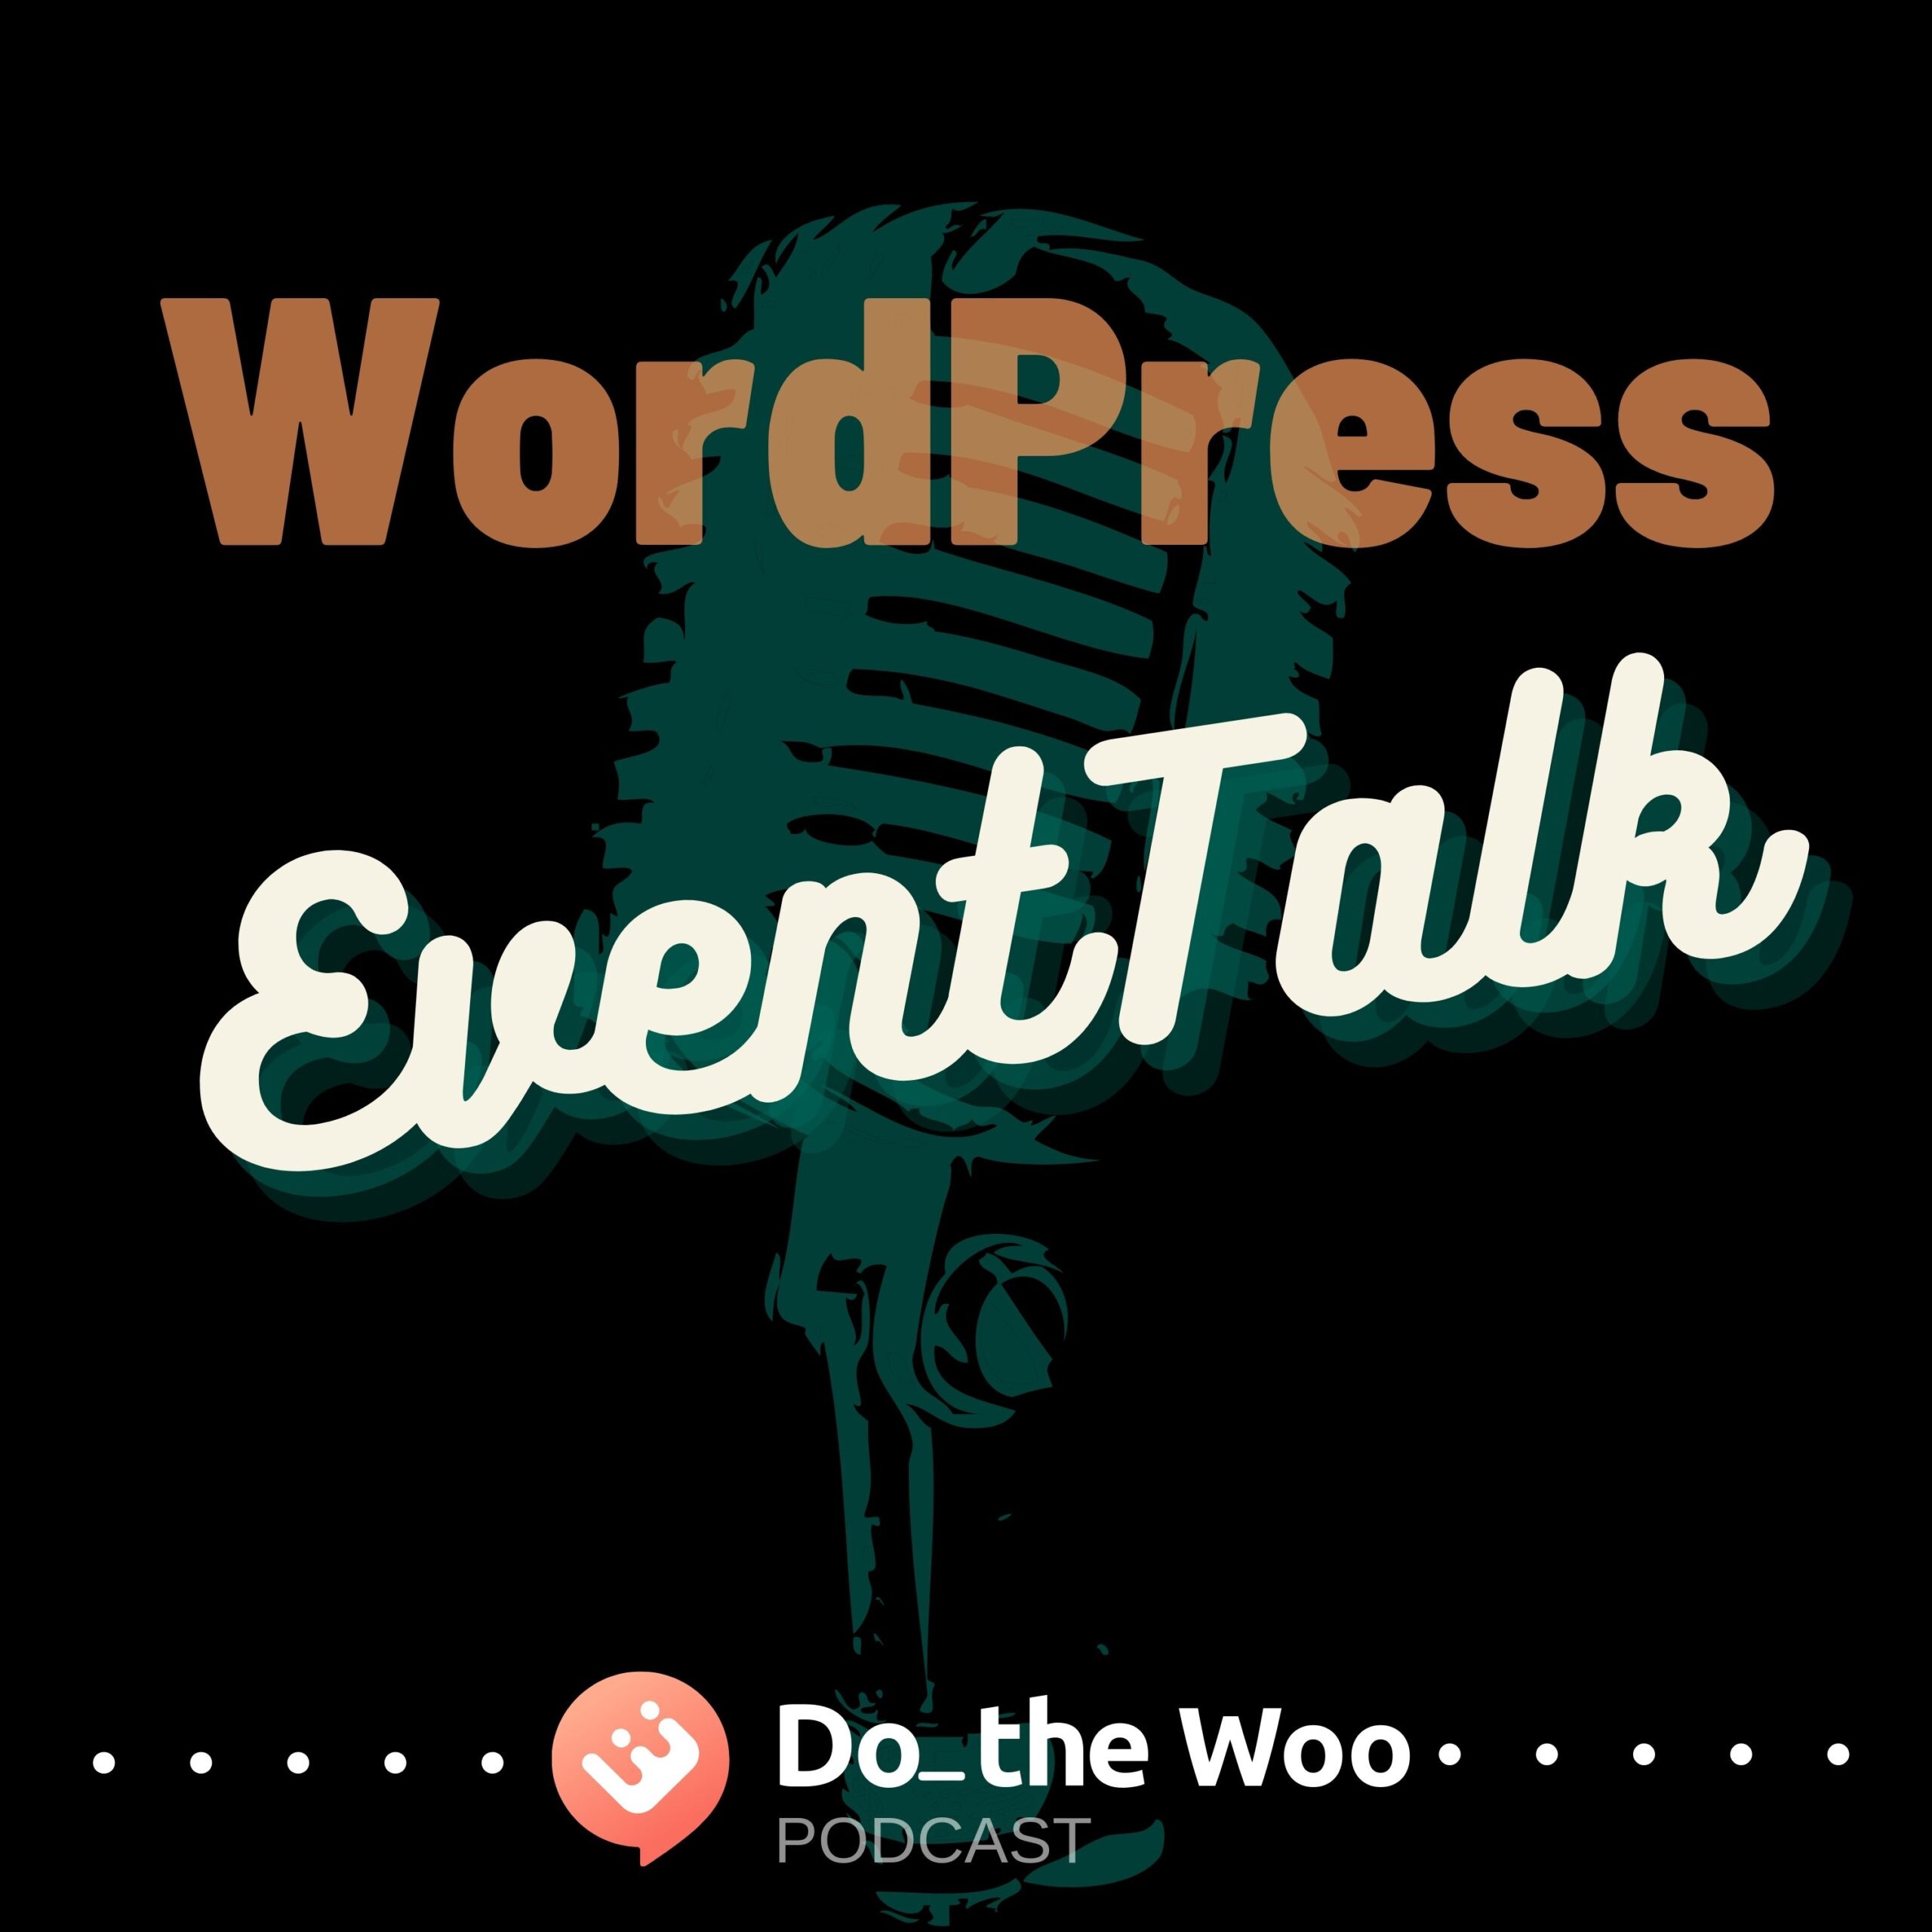 WordPress Meetup Wins, Challenges and Initiatives with Dave Loodts and Kasirye Arthur